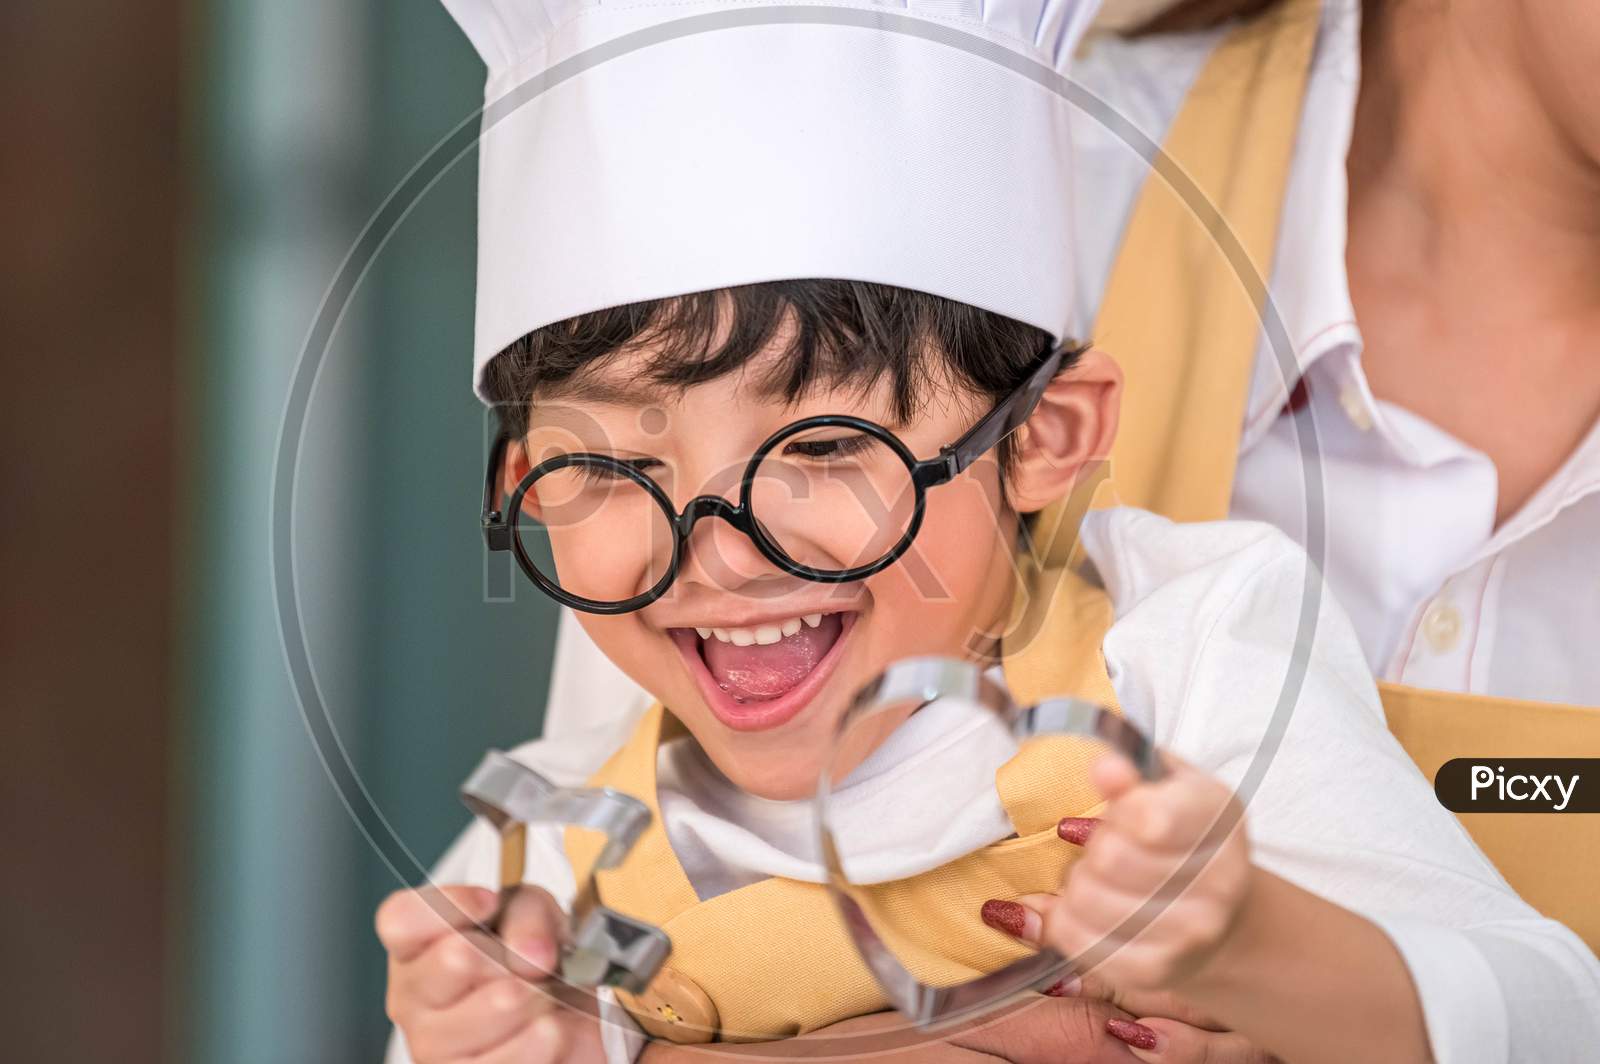 Cute Little Asian Happy Boy Interested In Cooking With Mother Funny In Home Kitchen. People Lifestyles And Family. Homemade Food And Ingredients Concept. Two People Baking Christmas Cake And Cookies